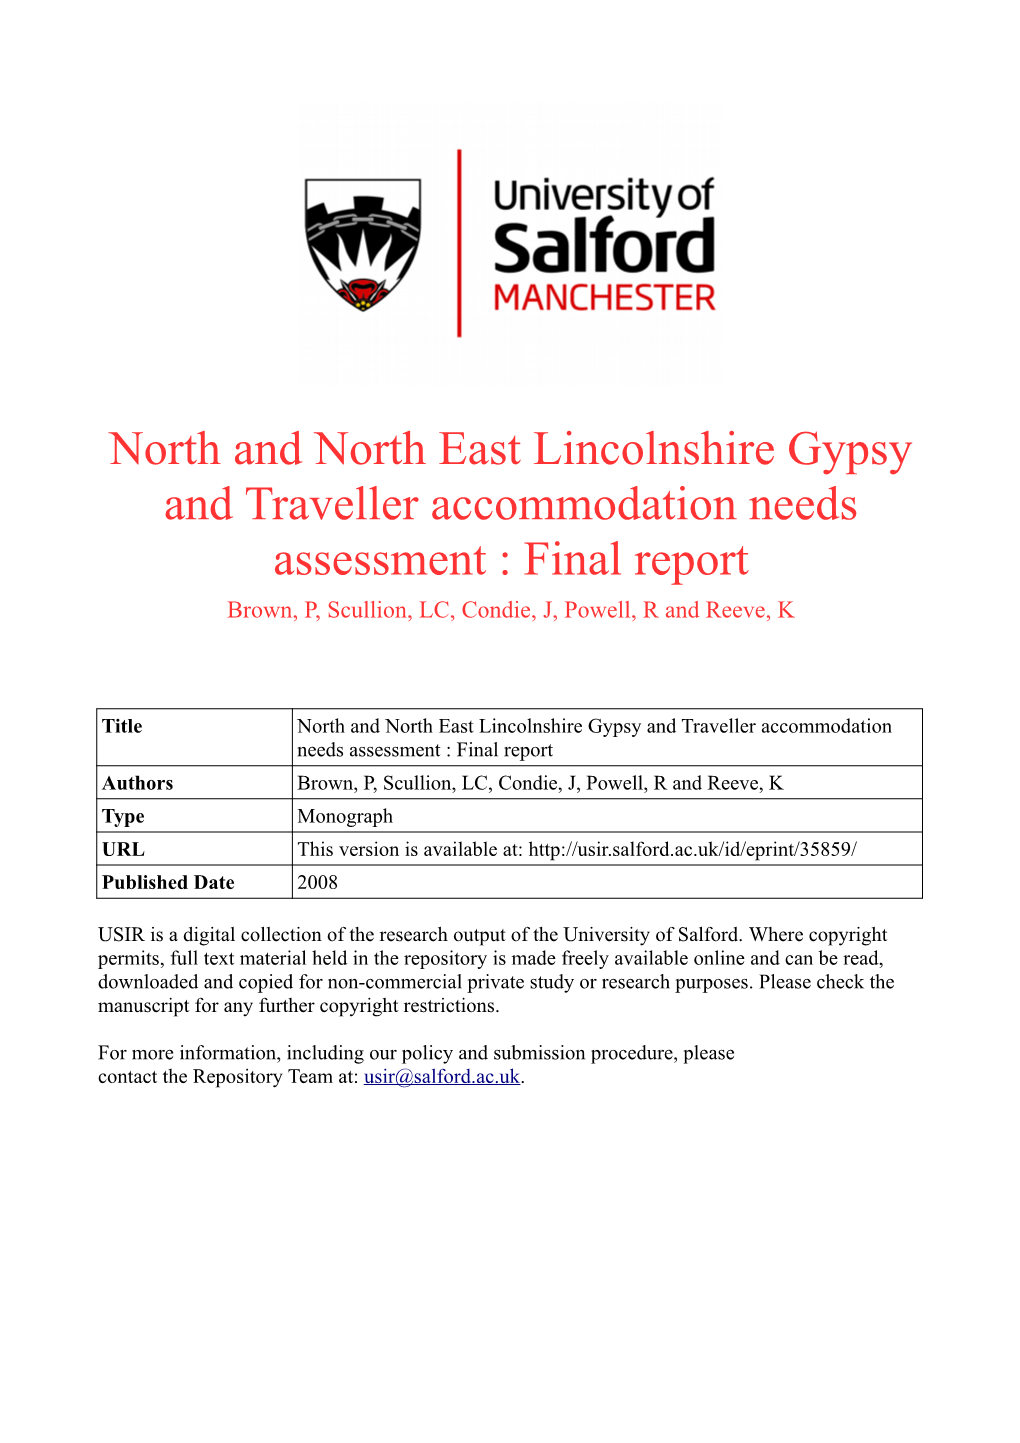 North and North East Lincolnshire Gypsy and Traveller Accommodation Needs Assessment : Final Report Brown, P, Scullion, LC, Condie, J, Powell, R and Reeve, K